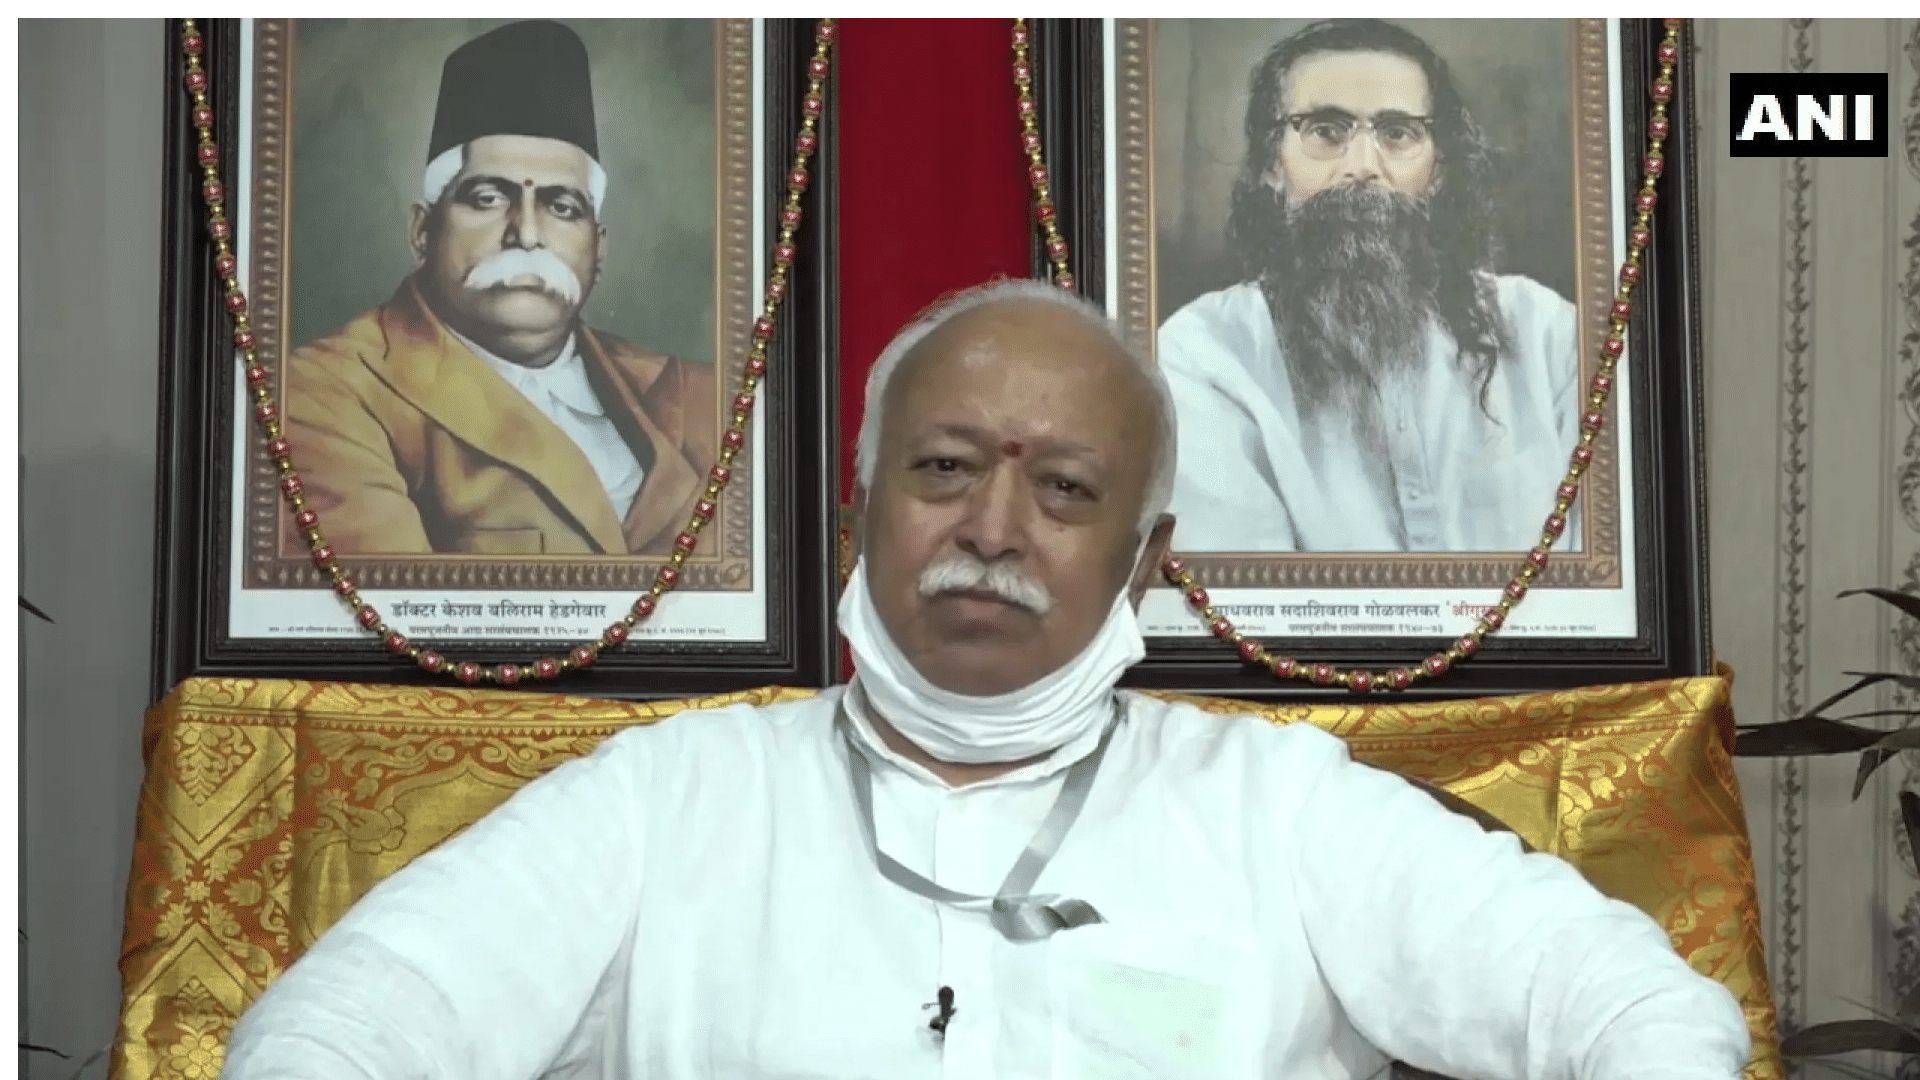 Who is Mohan Bhagwat?